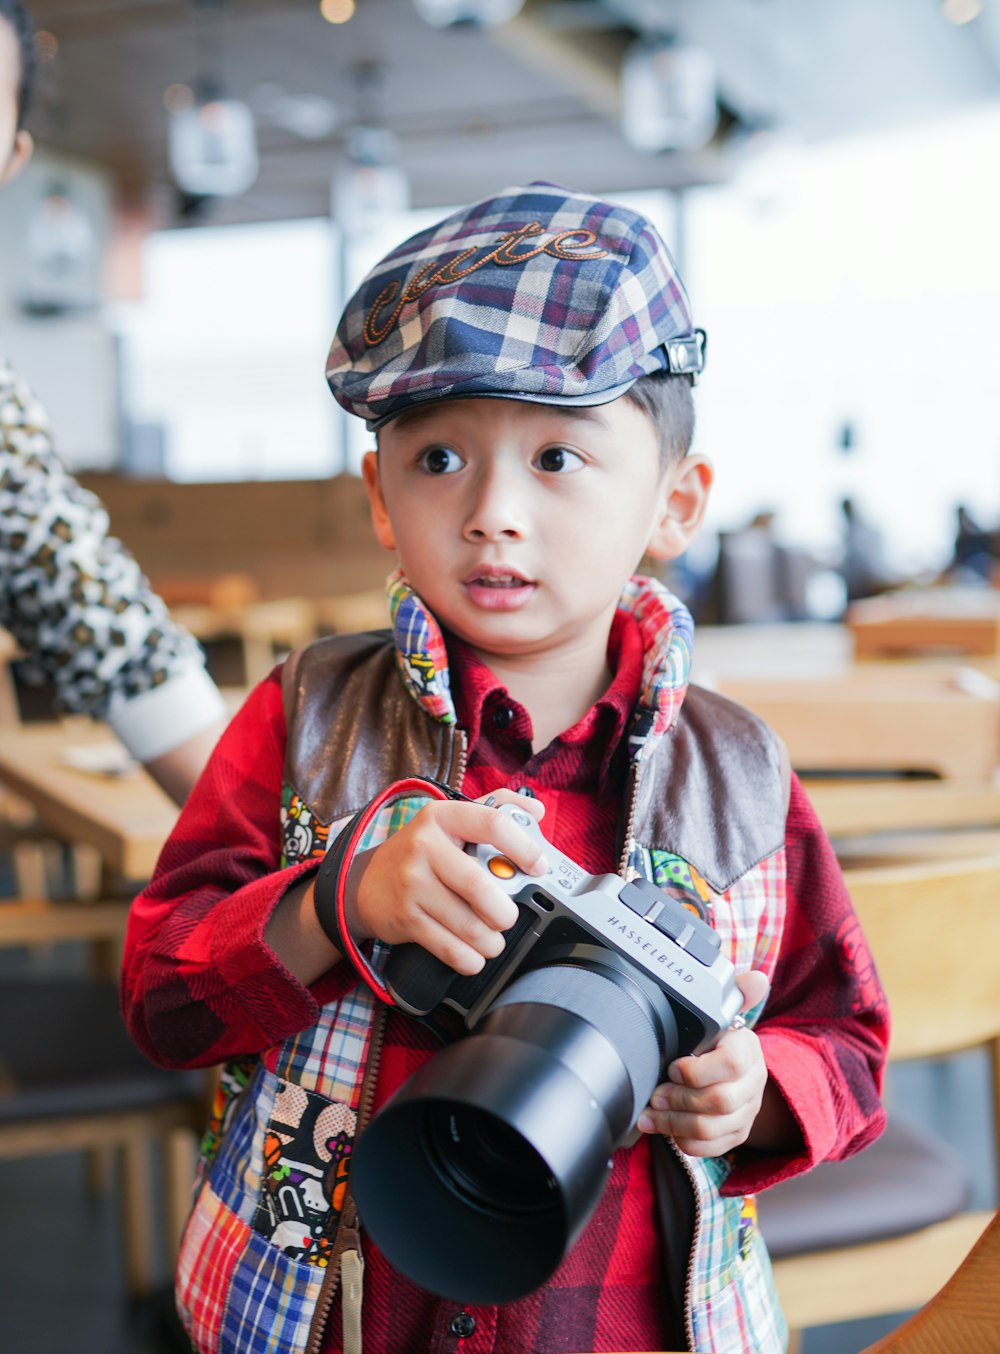 a young boy is holding a camera and taking a picture